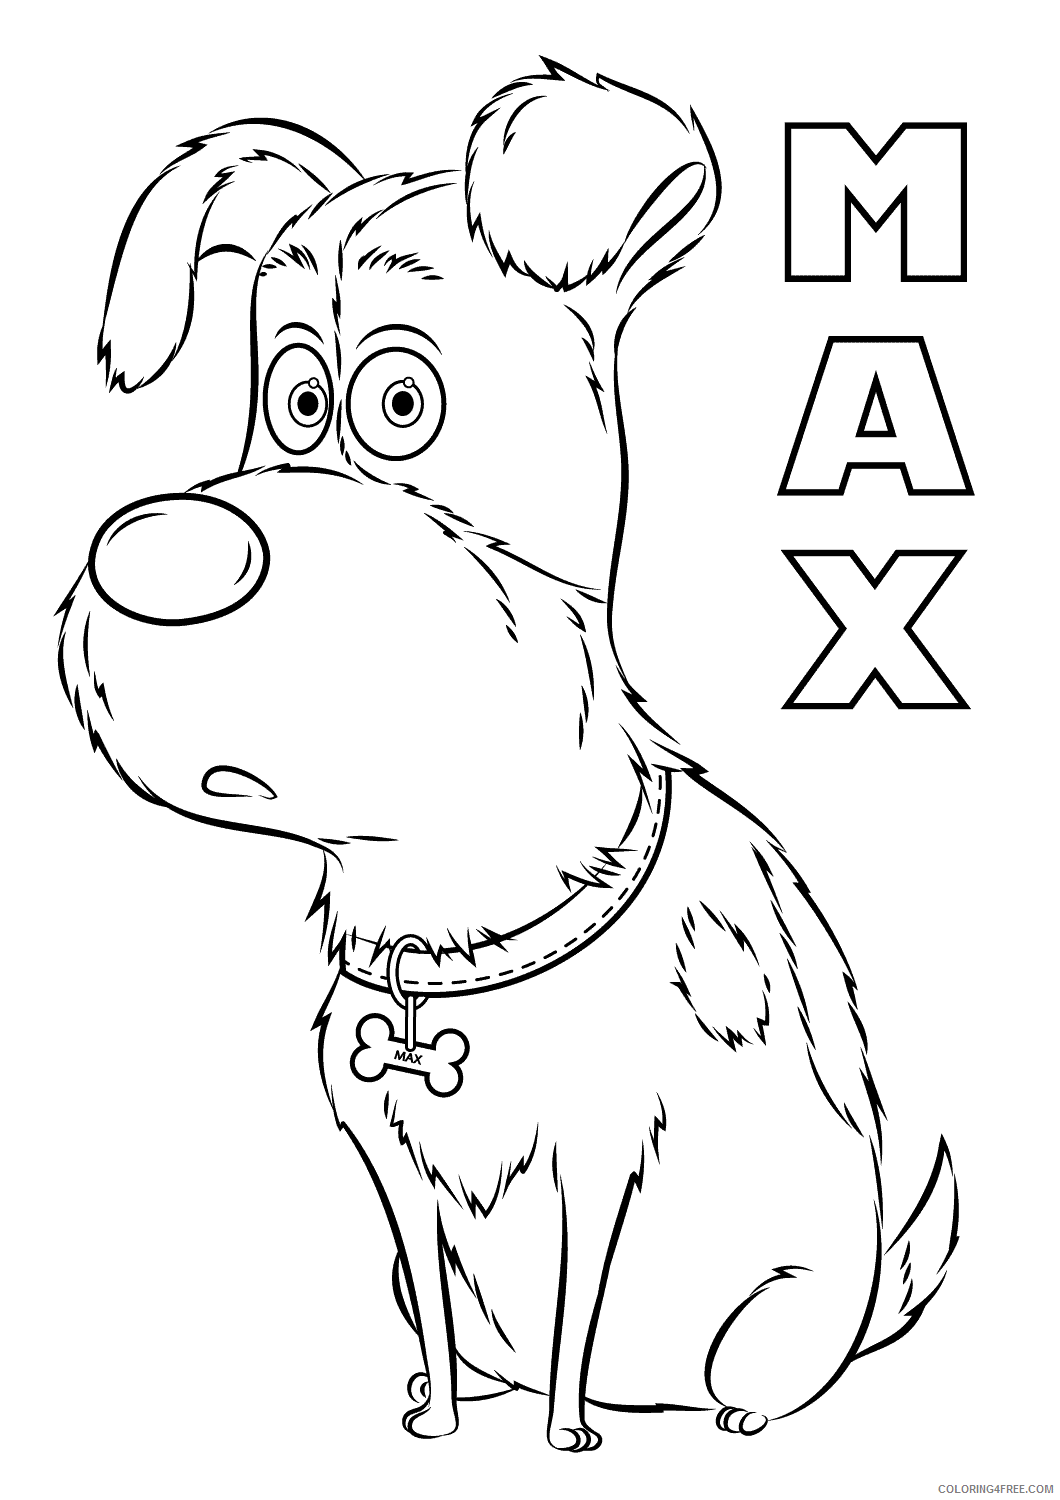 The Secret Life of Pets Coloring Pages TV Film Max Printable 2020 09491 Coloring4free